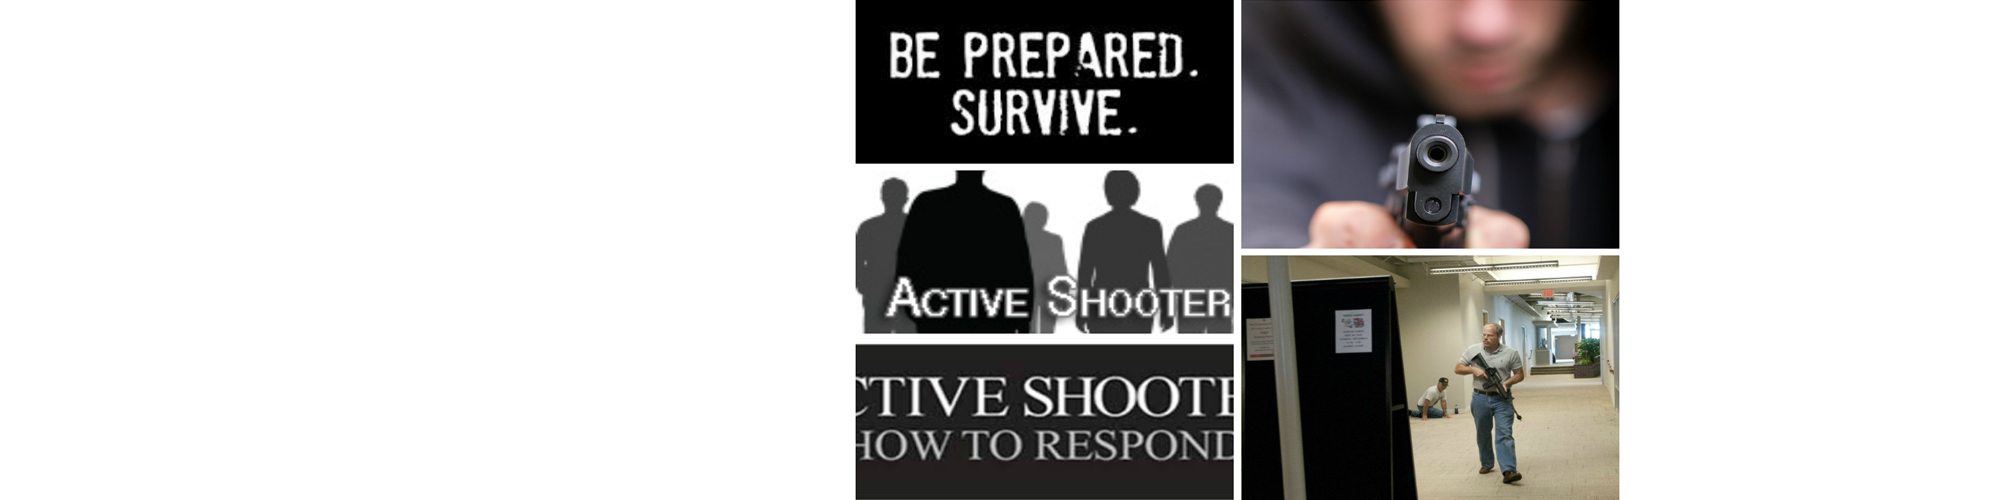 RedHawk Active Shooter Response Courses